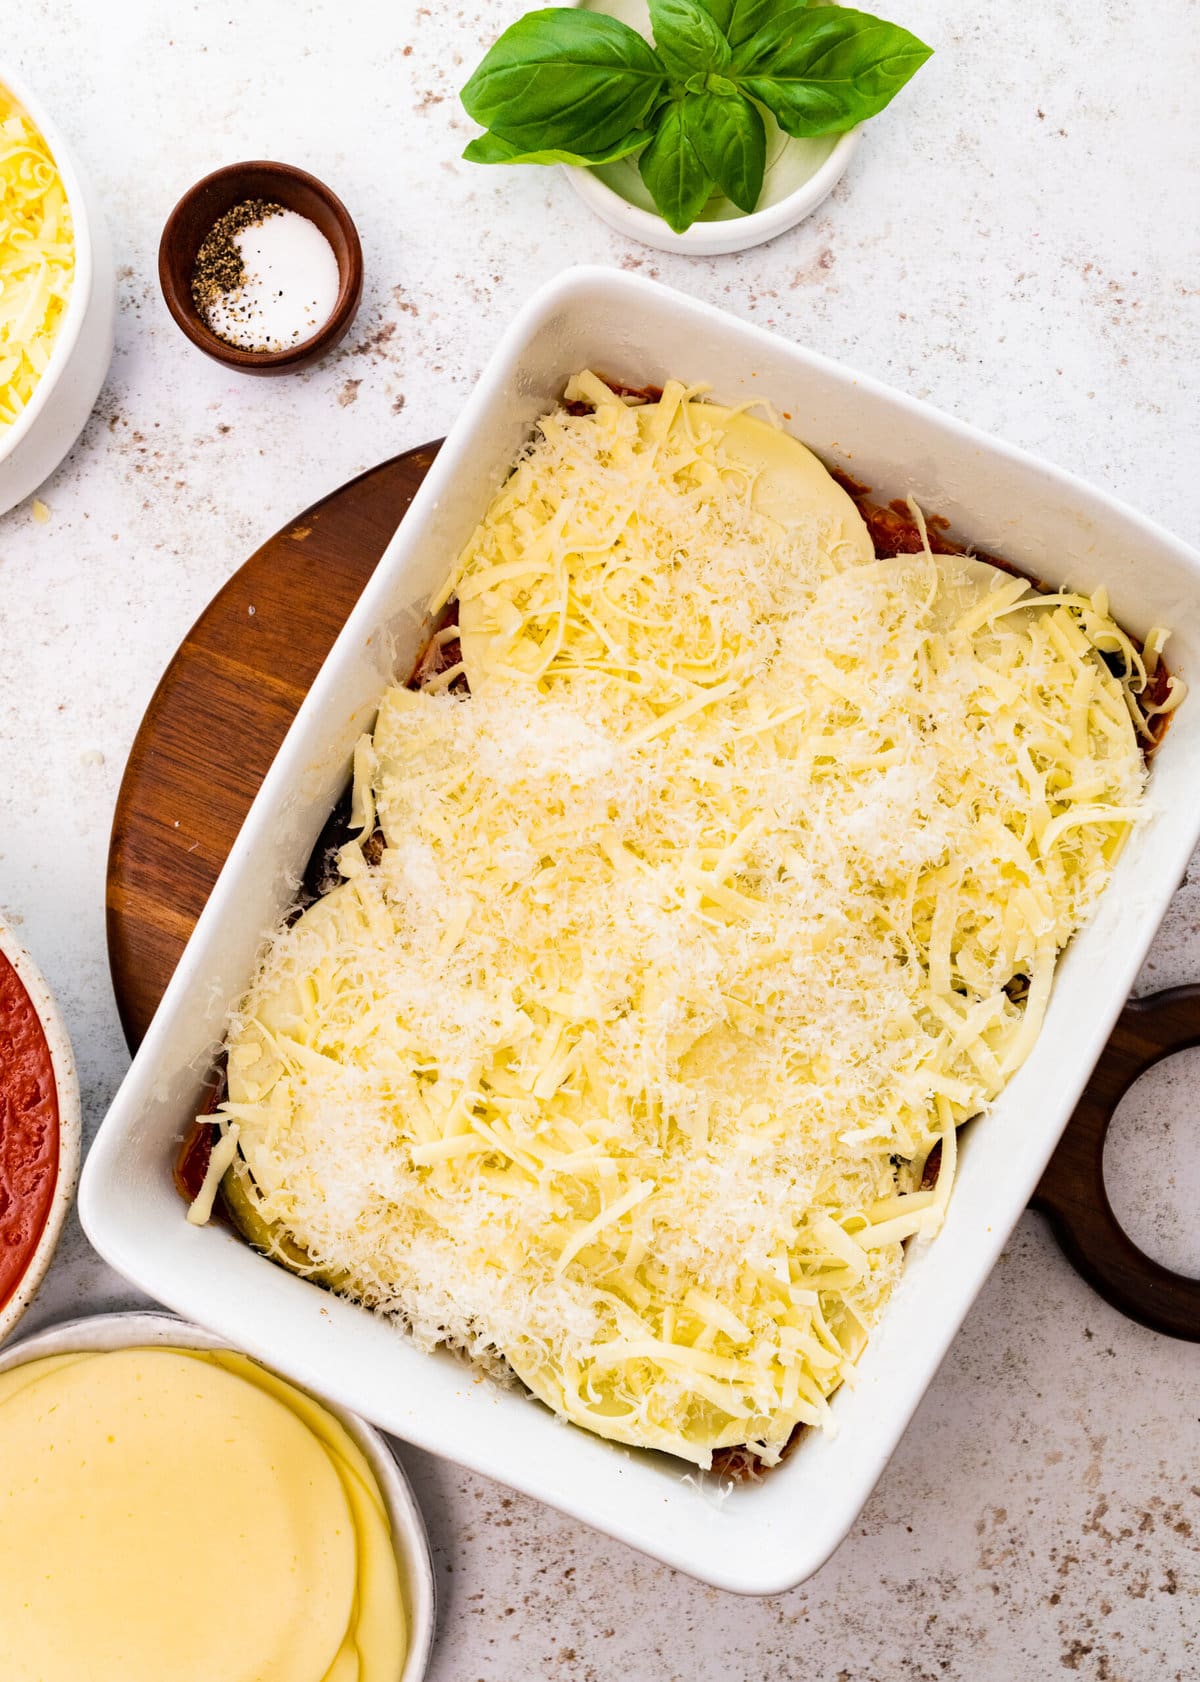 how to make eggplant parmigiana step-by-step: adding layers of both cheeses on top of the eggplant.